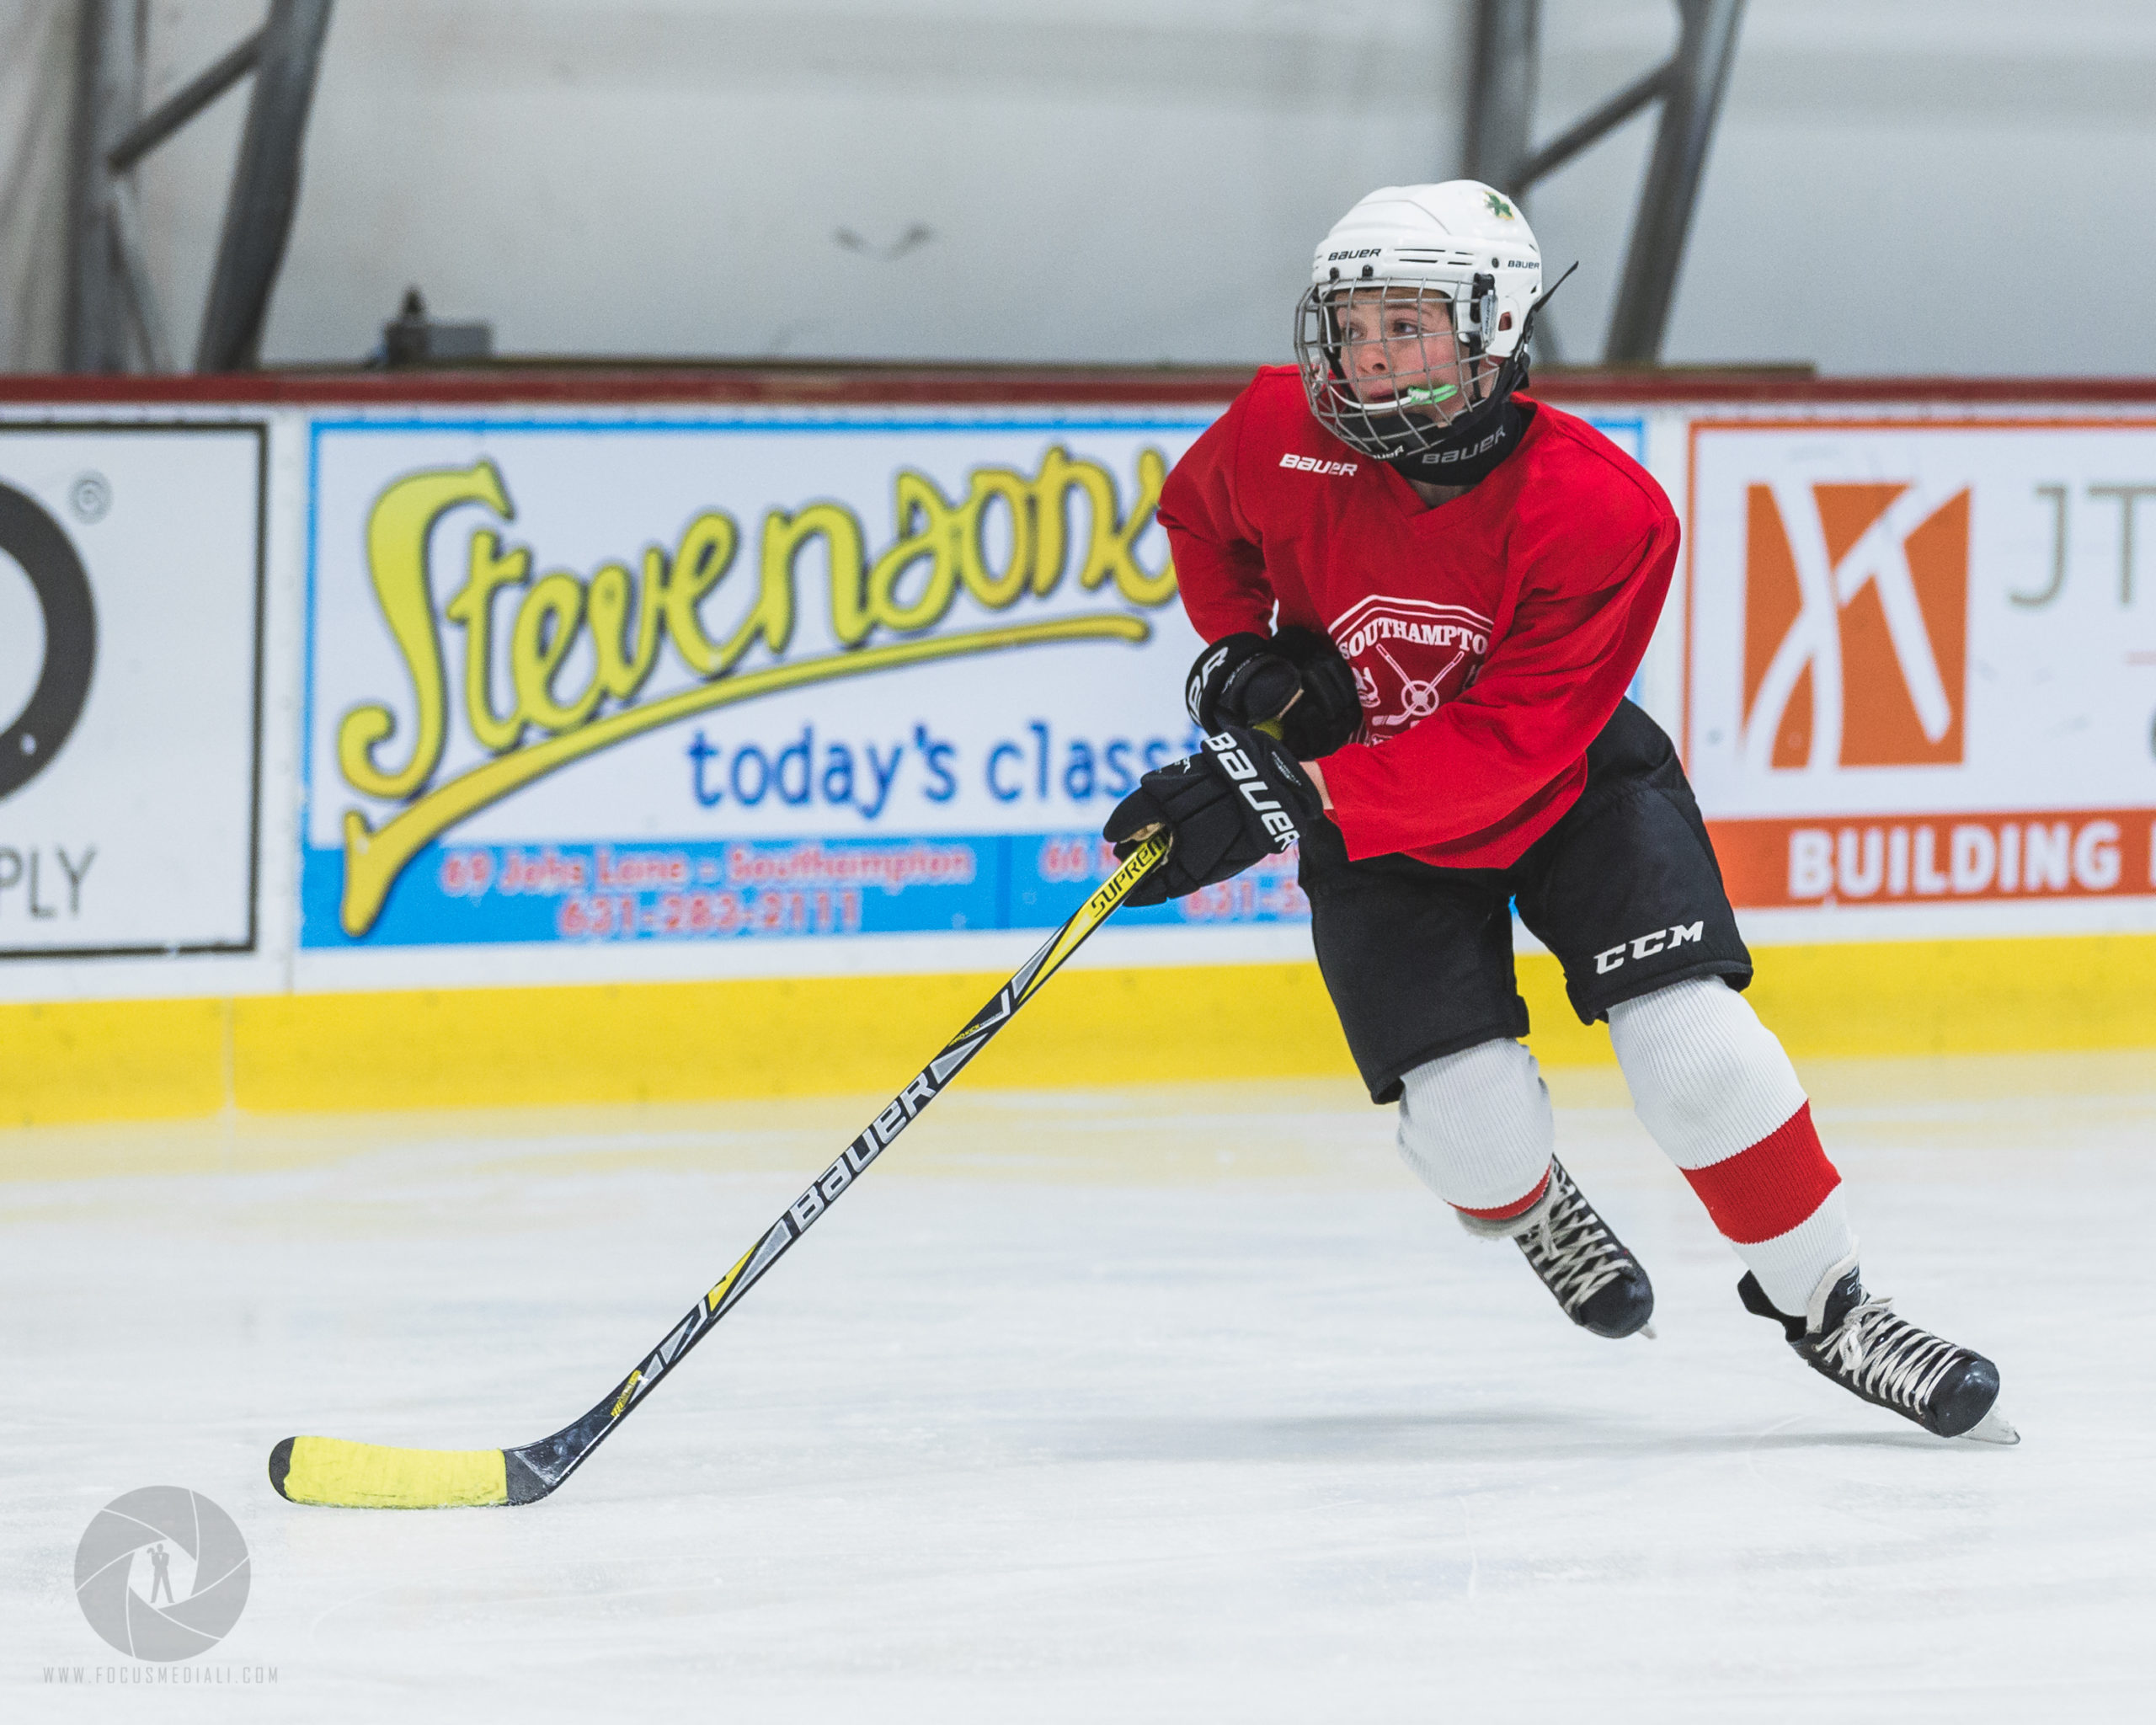 The burgeoning youth program at the Southampton Ice Rink has helped facilitate the high school hockey program Bryan Wish hopes to start.